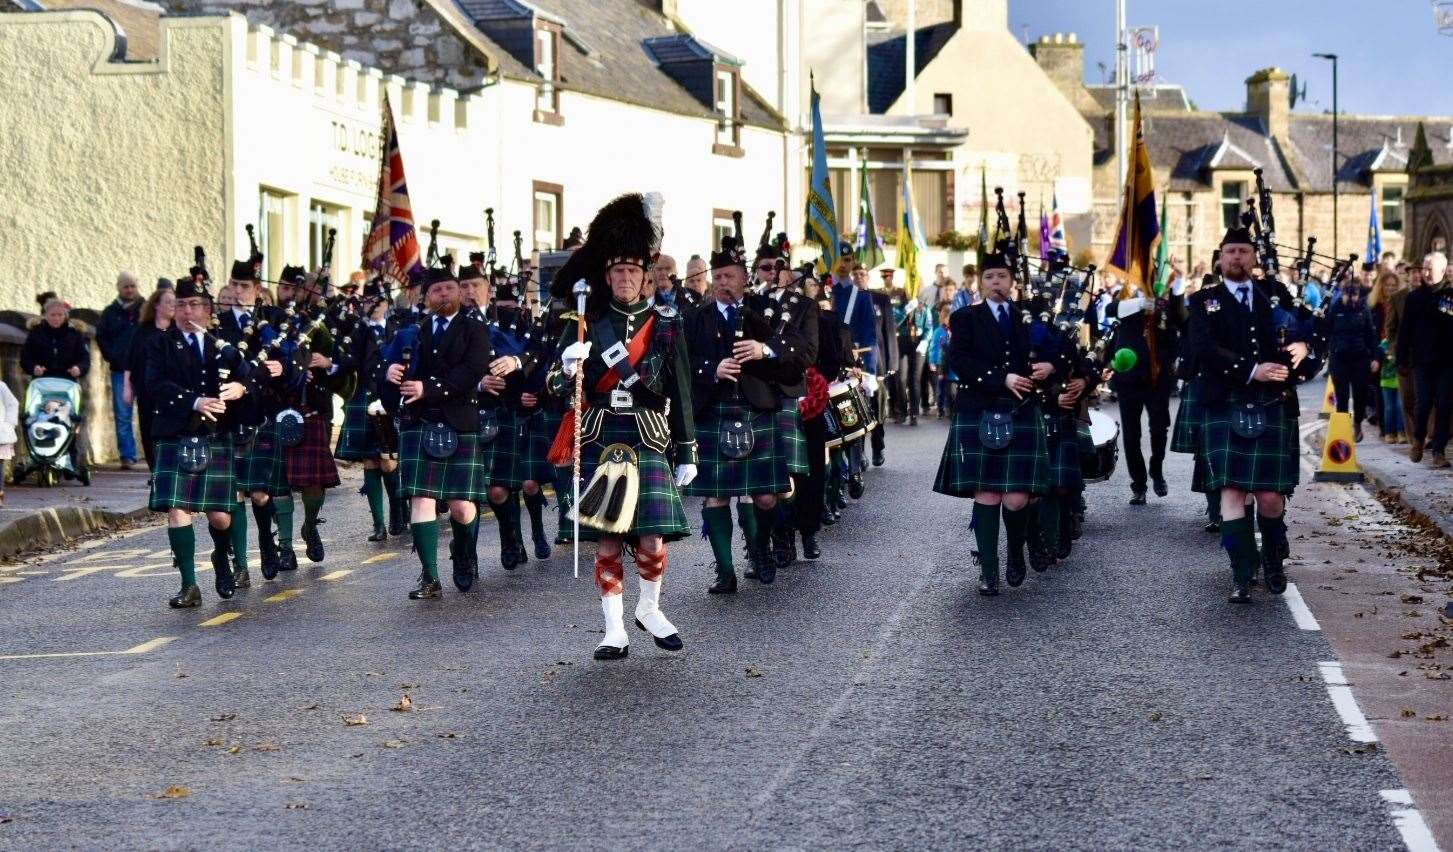 Forres Pipe Band will end a busy year playing for the community in the town centre.